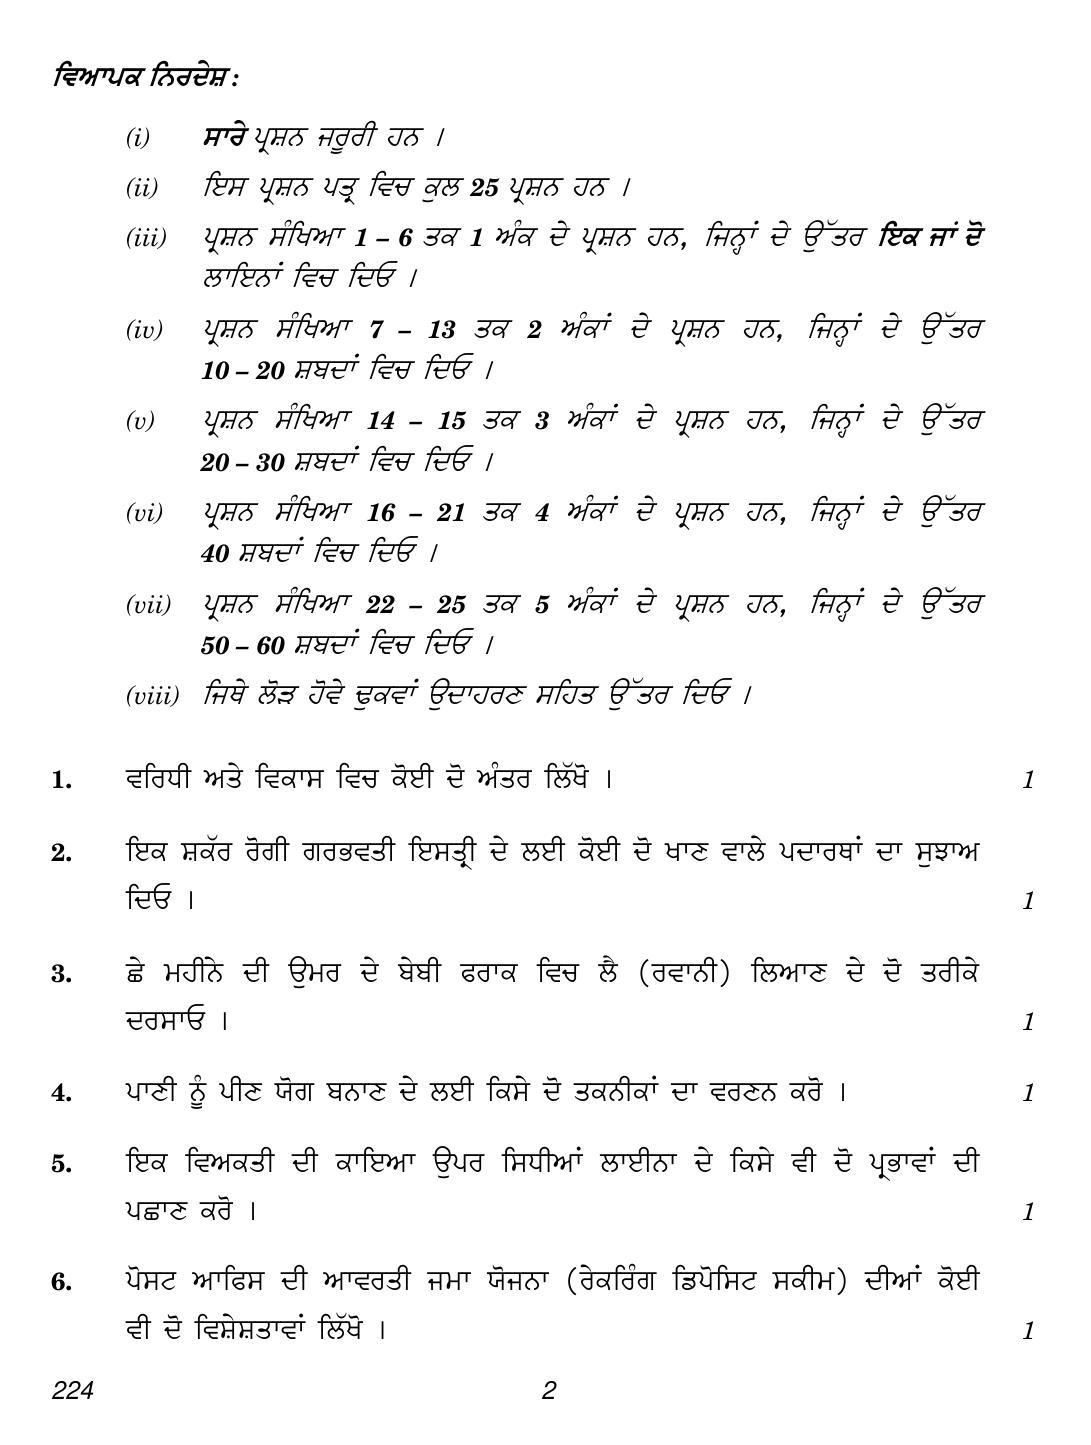 CBSE Class 12 224 (Home Science Punjabi) 2018 Question Paper - Page 2